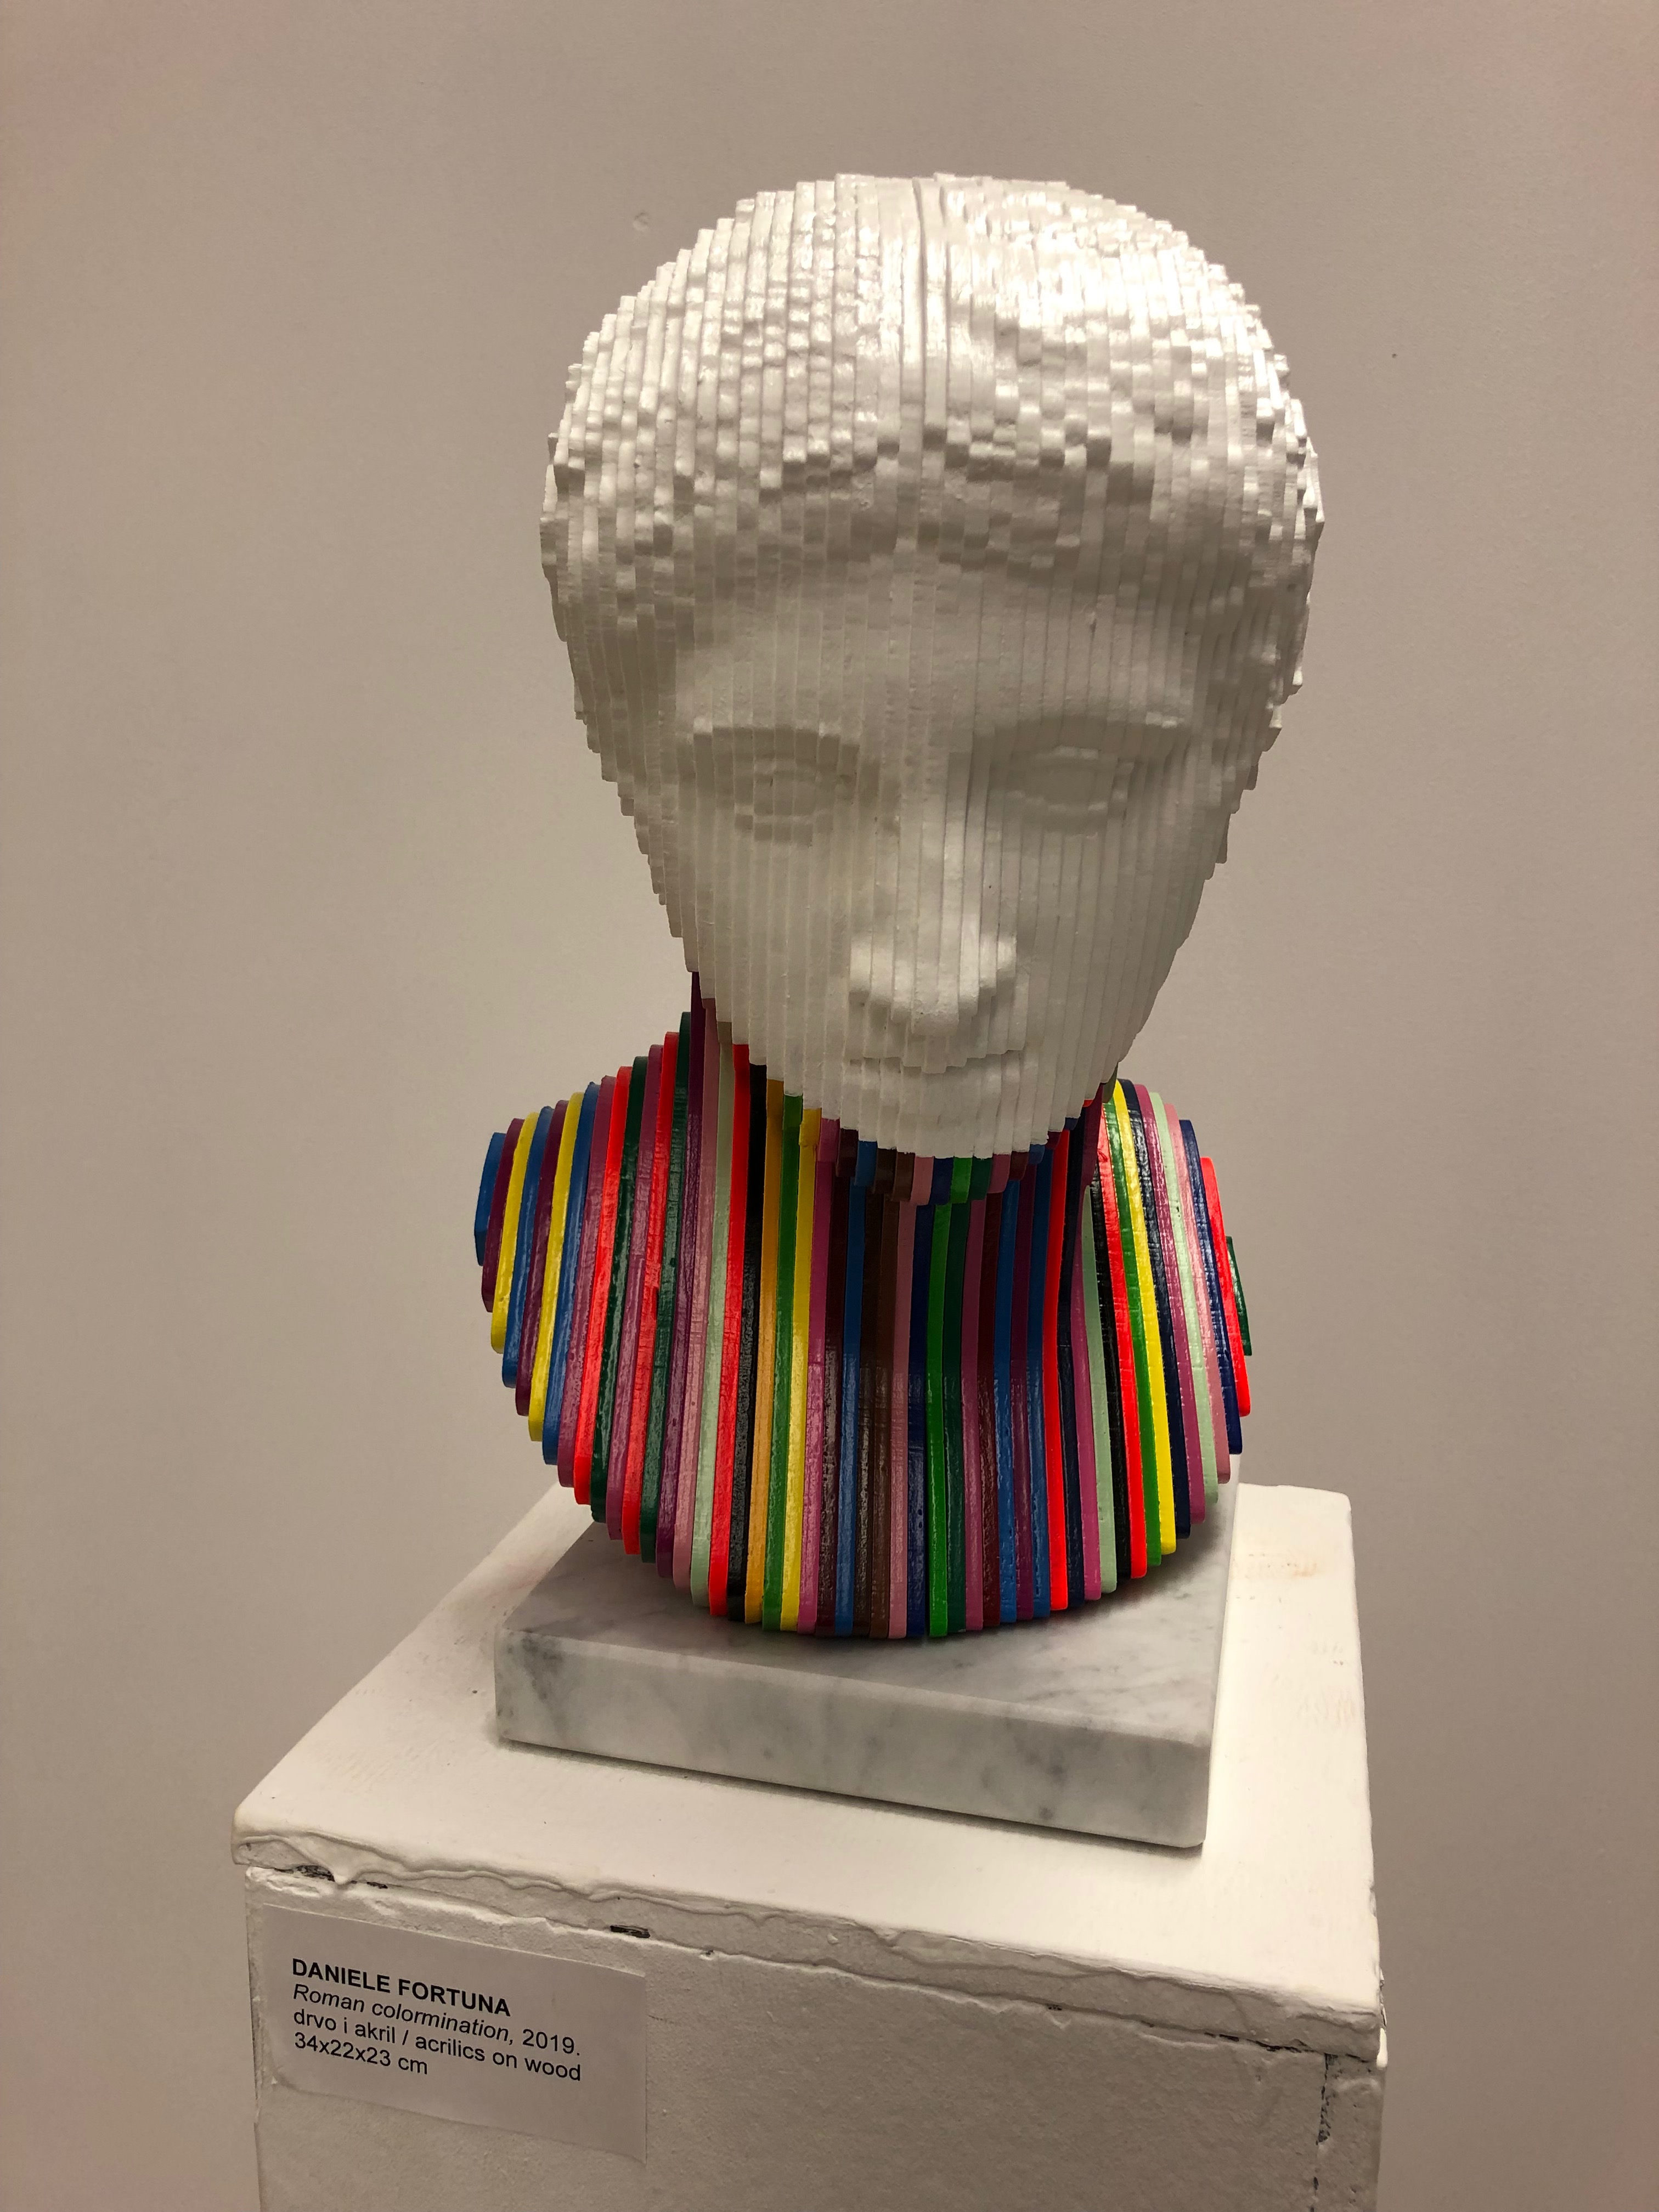 Roman colormination, 2019 by Daniele Fortuna on display at ArtZagreb